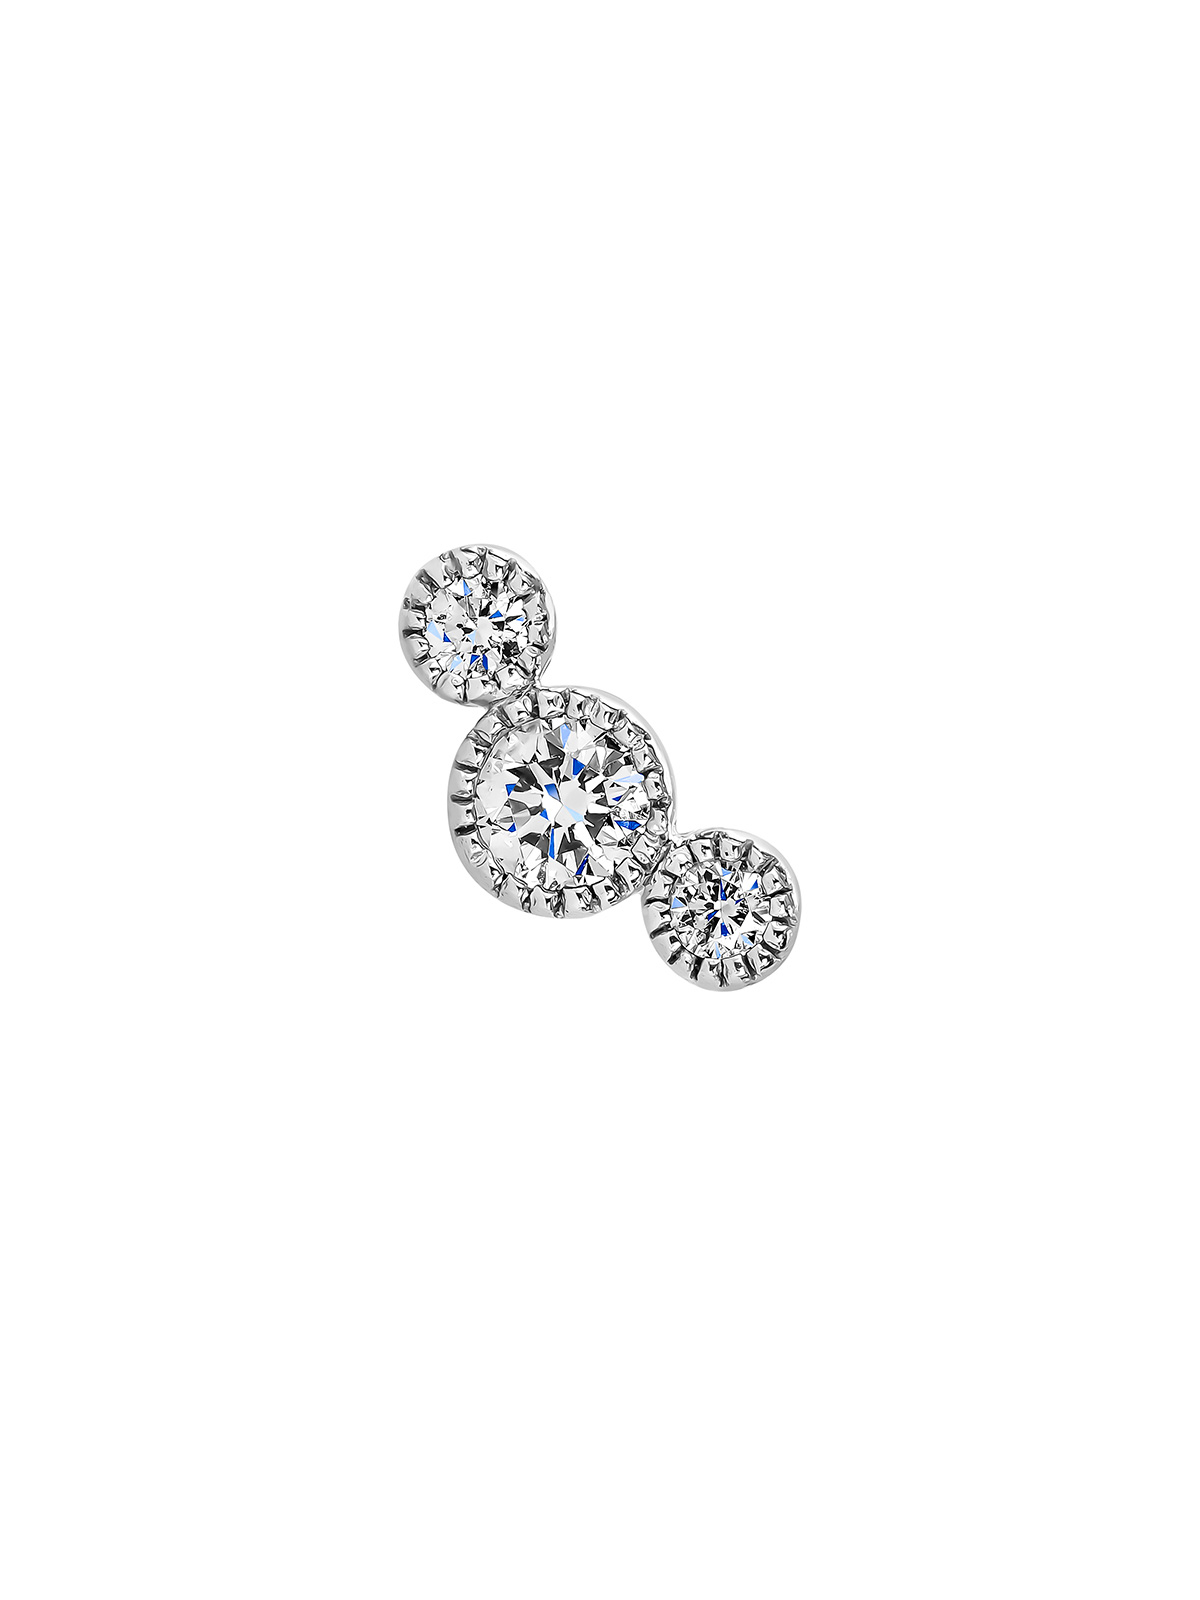 Individual 9K white gold earring with 0.097 cts diamonds